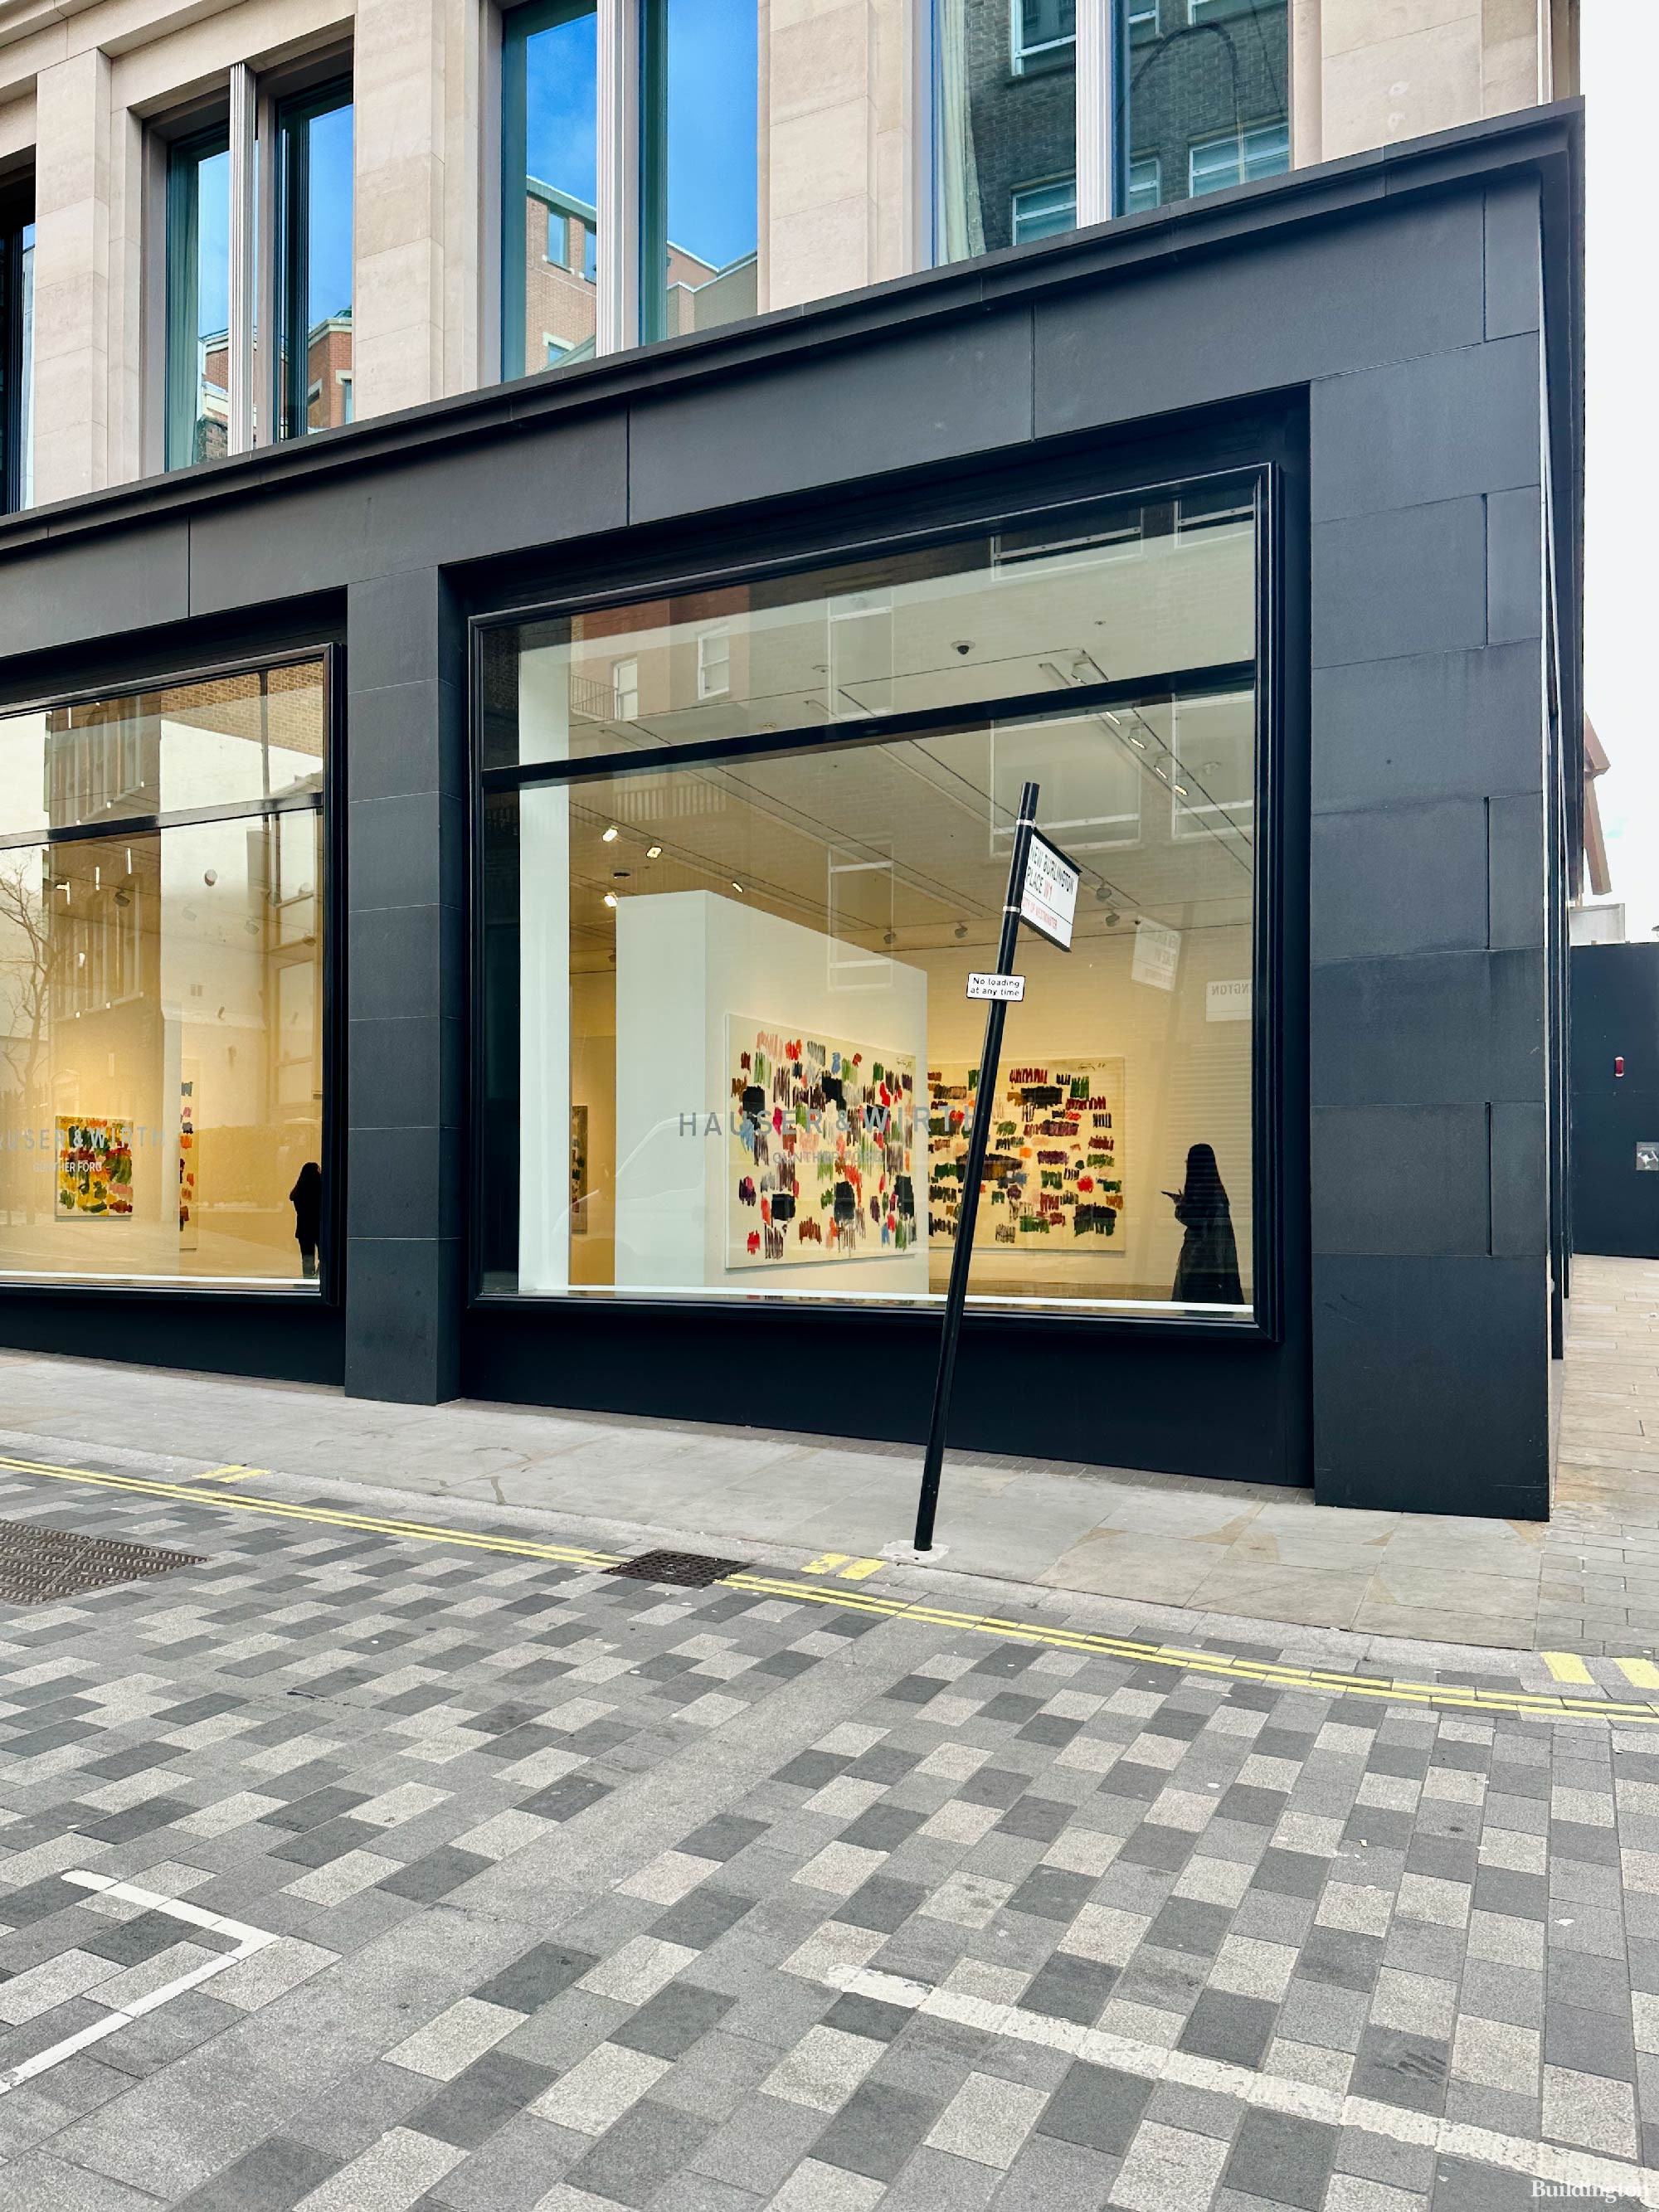 Hauser & Wirth gallery at 23 Savile Row in Mayfair, London W1